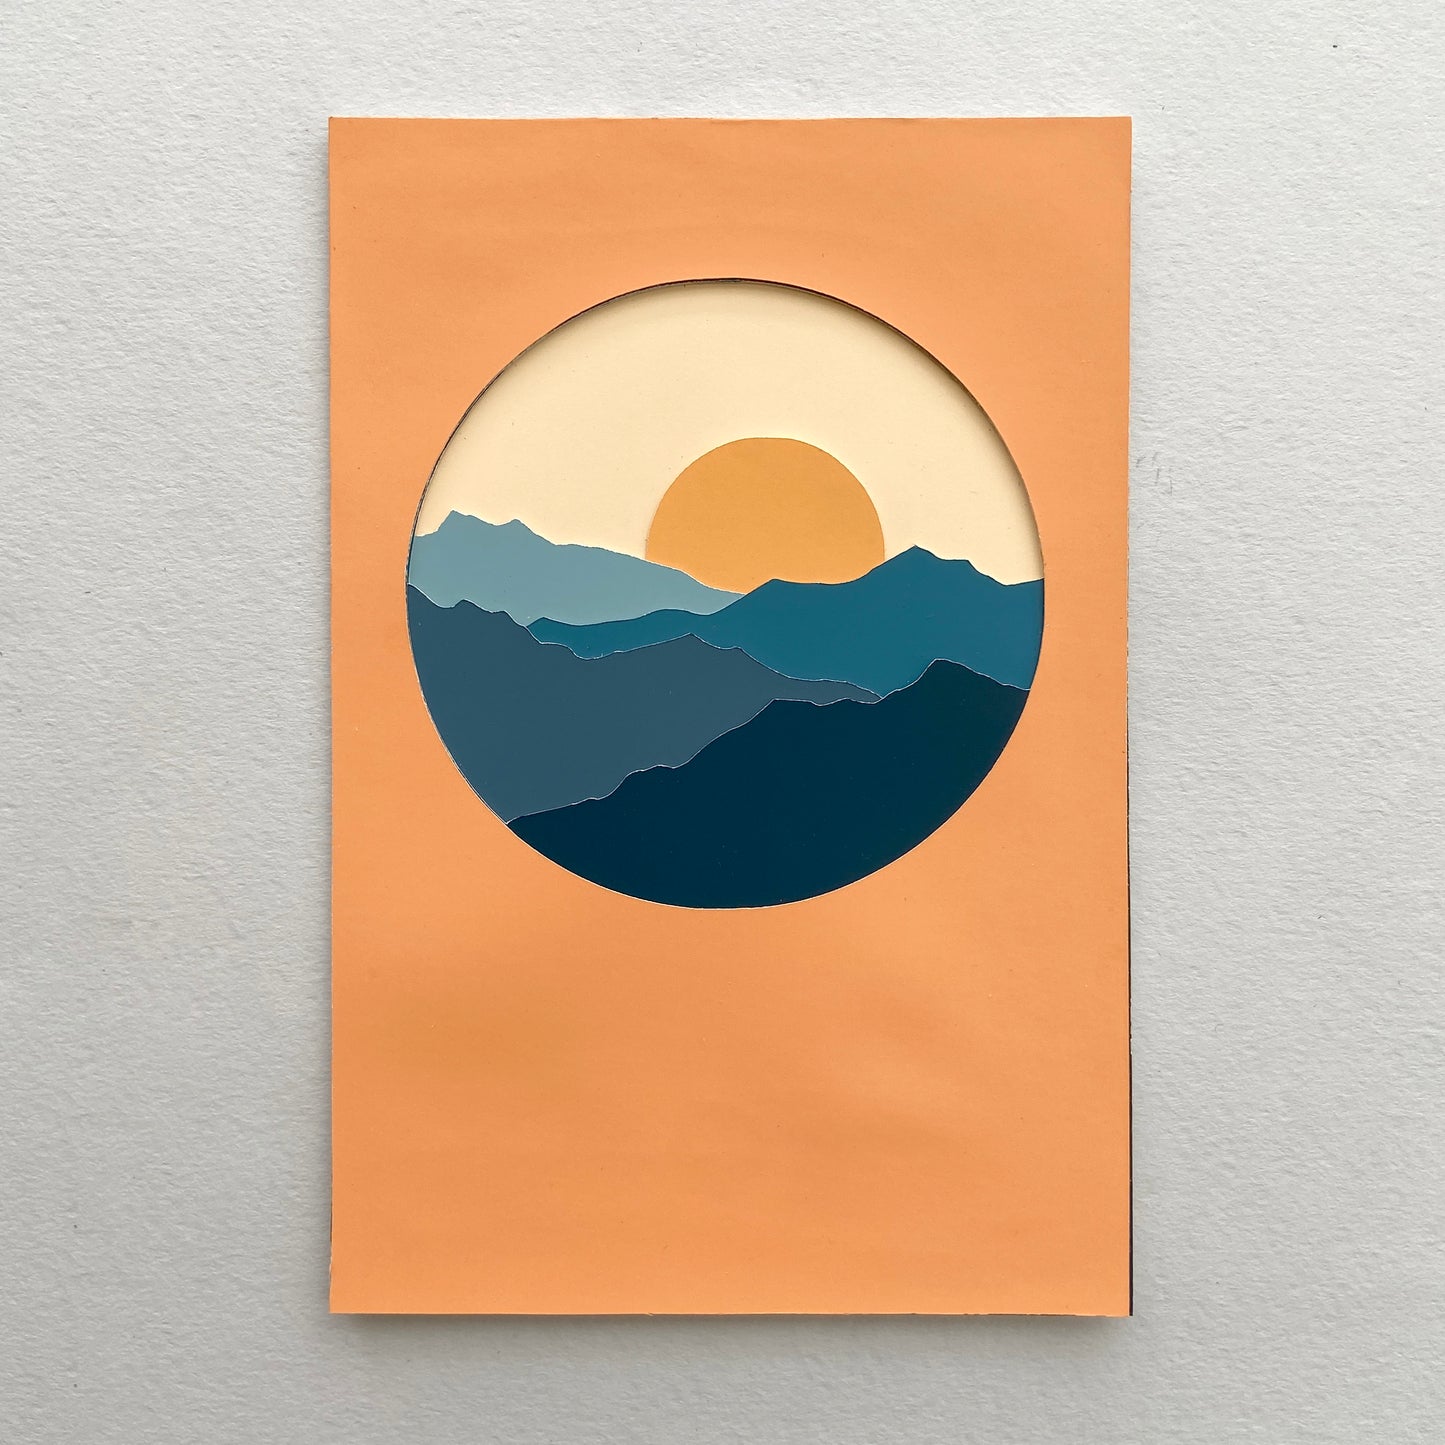 Sunset Olympic Mountainscape Paper-cut